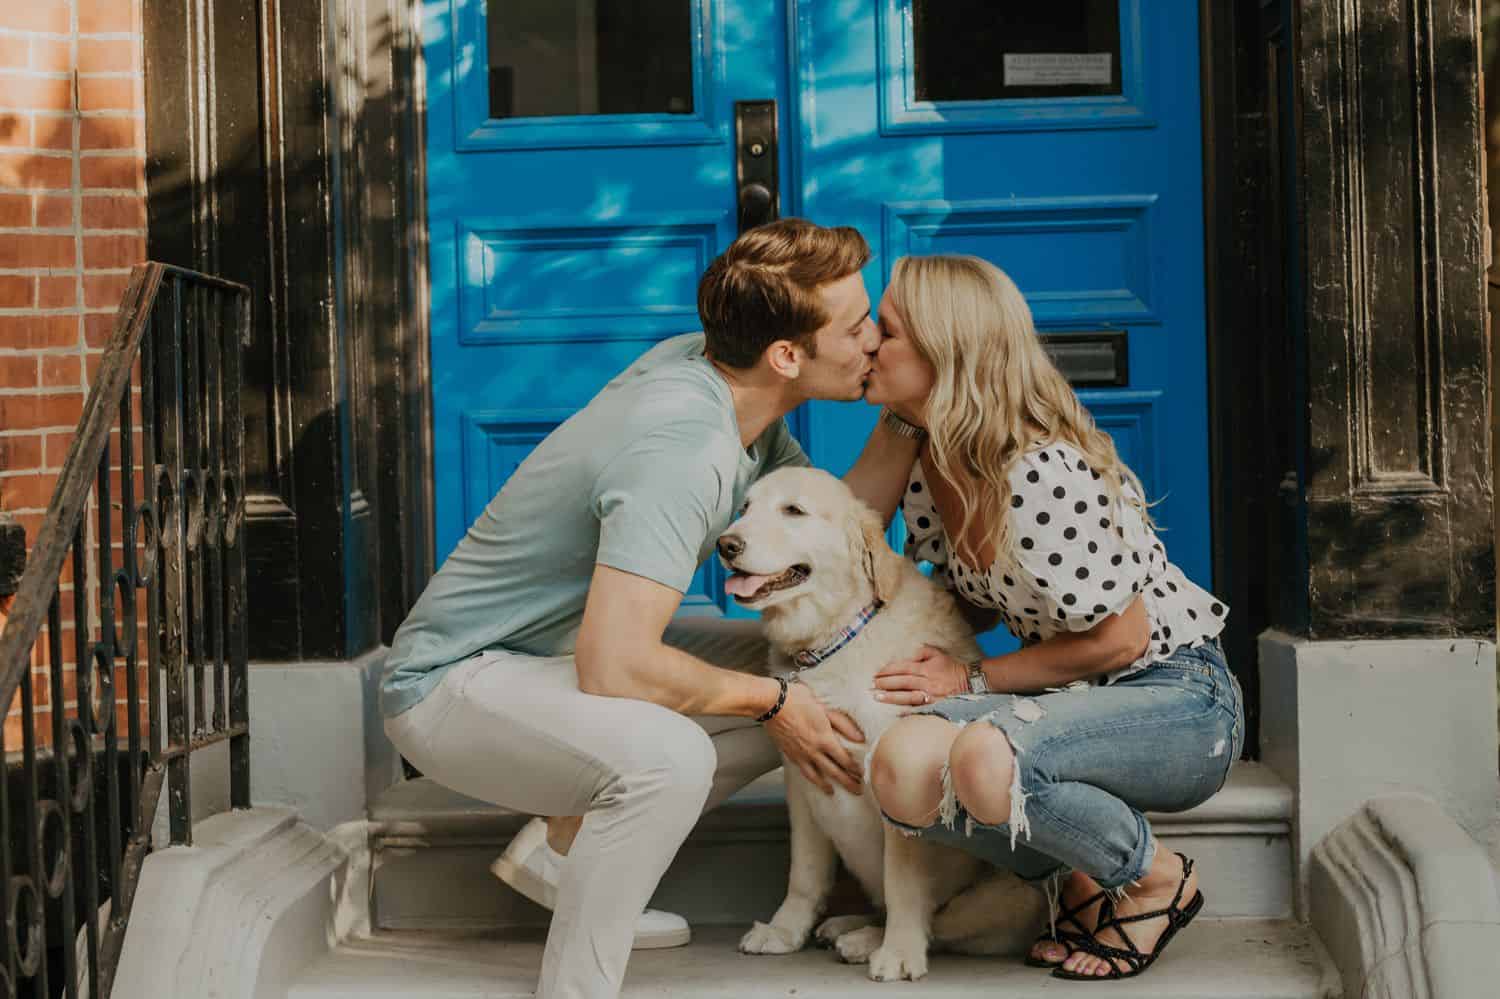 See how dog photography can enhance your portrait and wedding images. Your clients will love adding their furry family member to their next session!